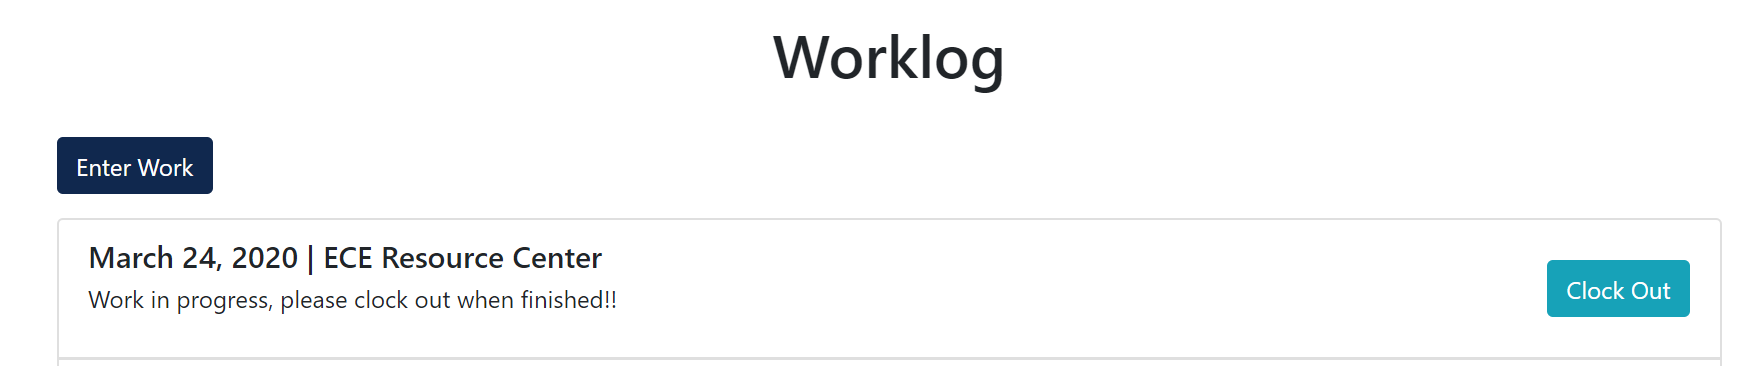 Worklog Clock Out